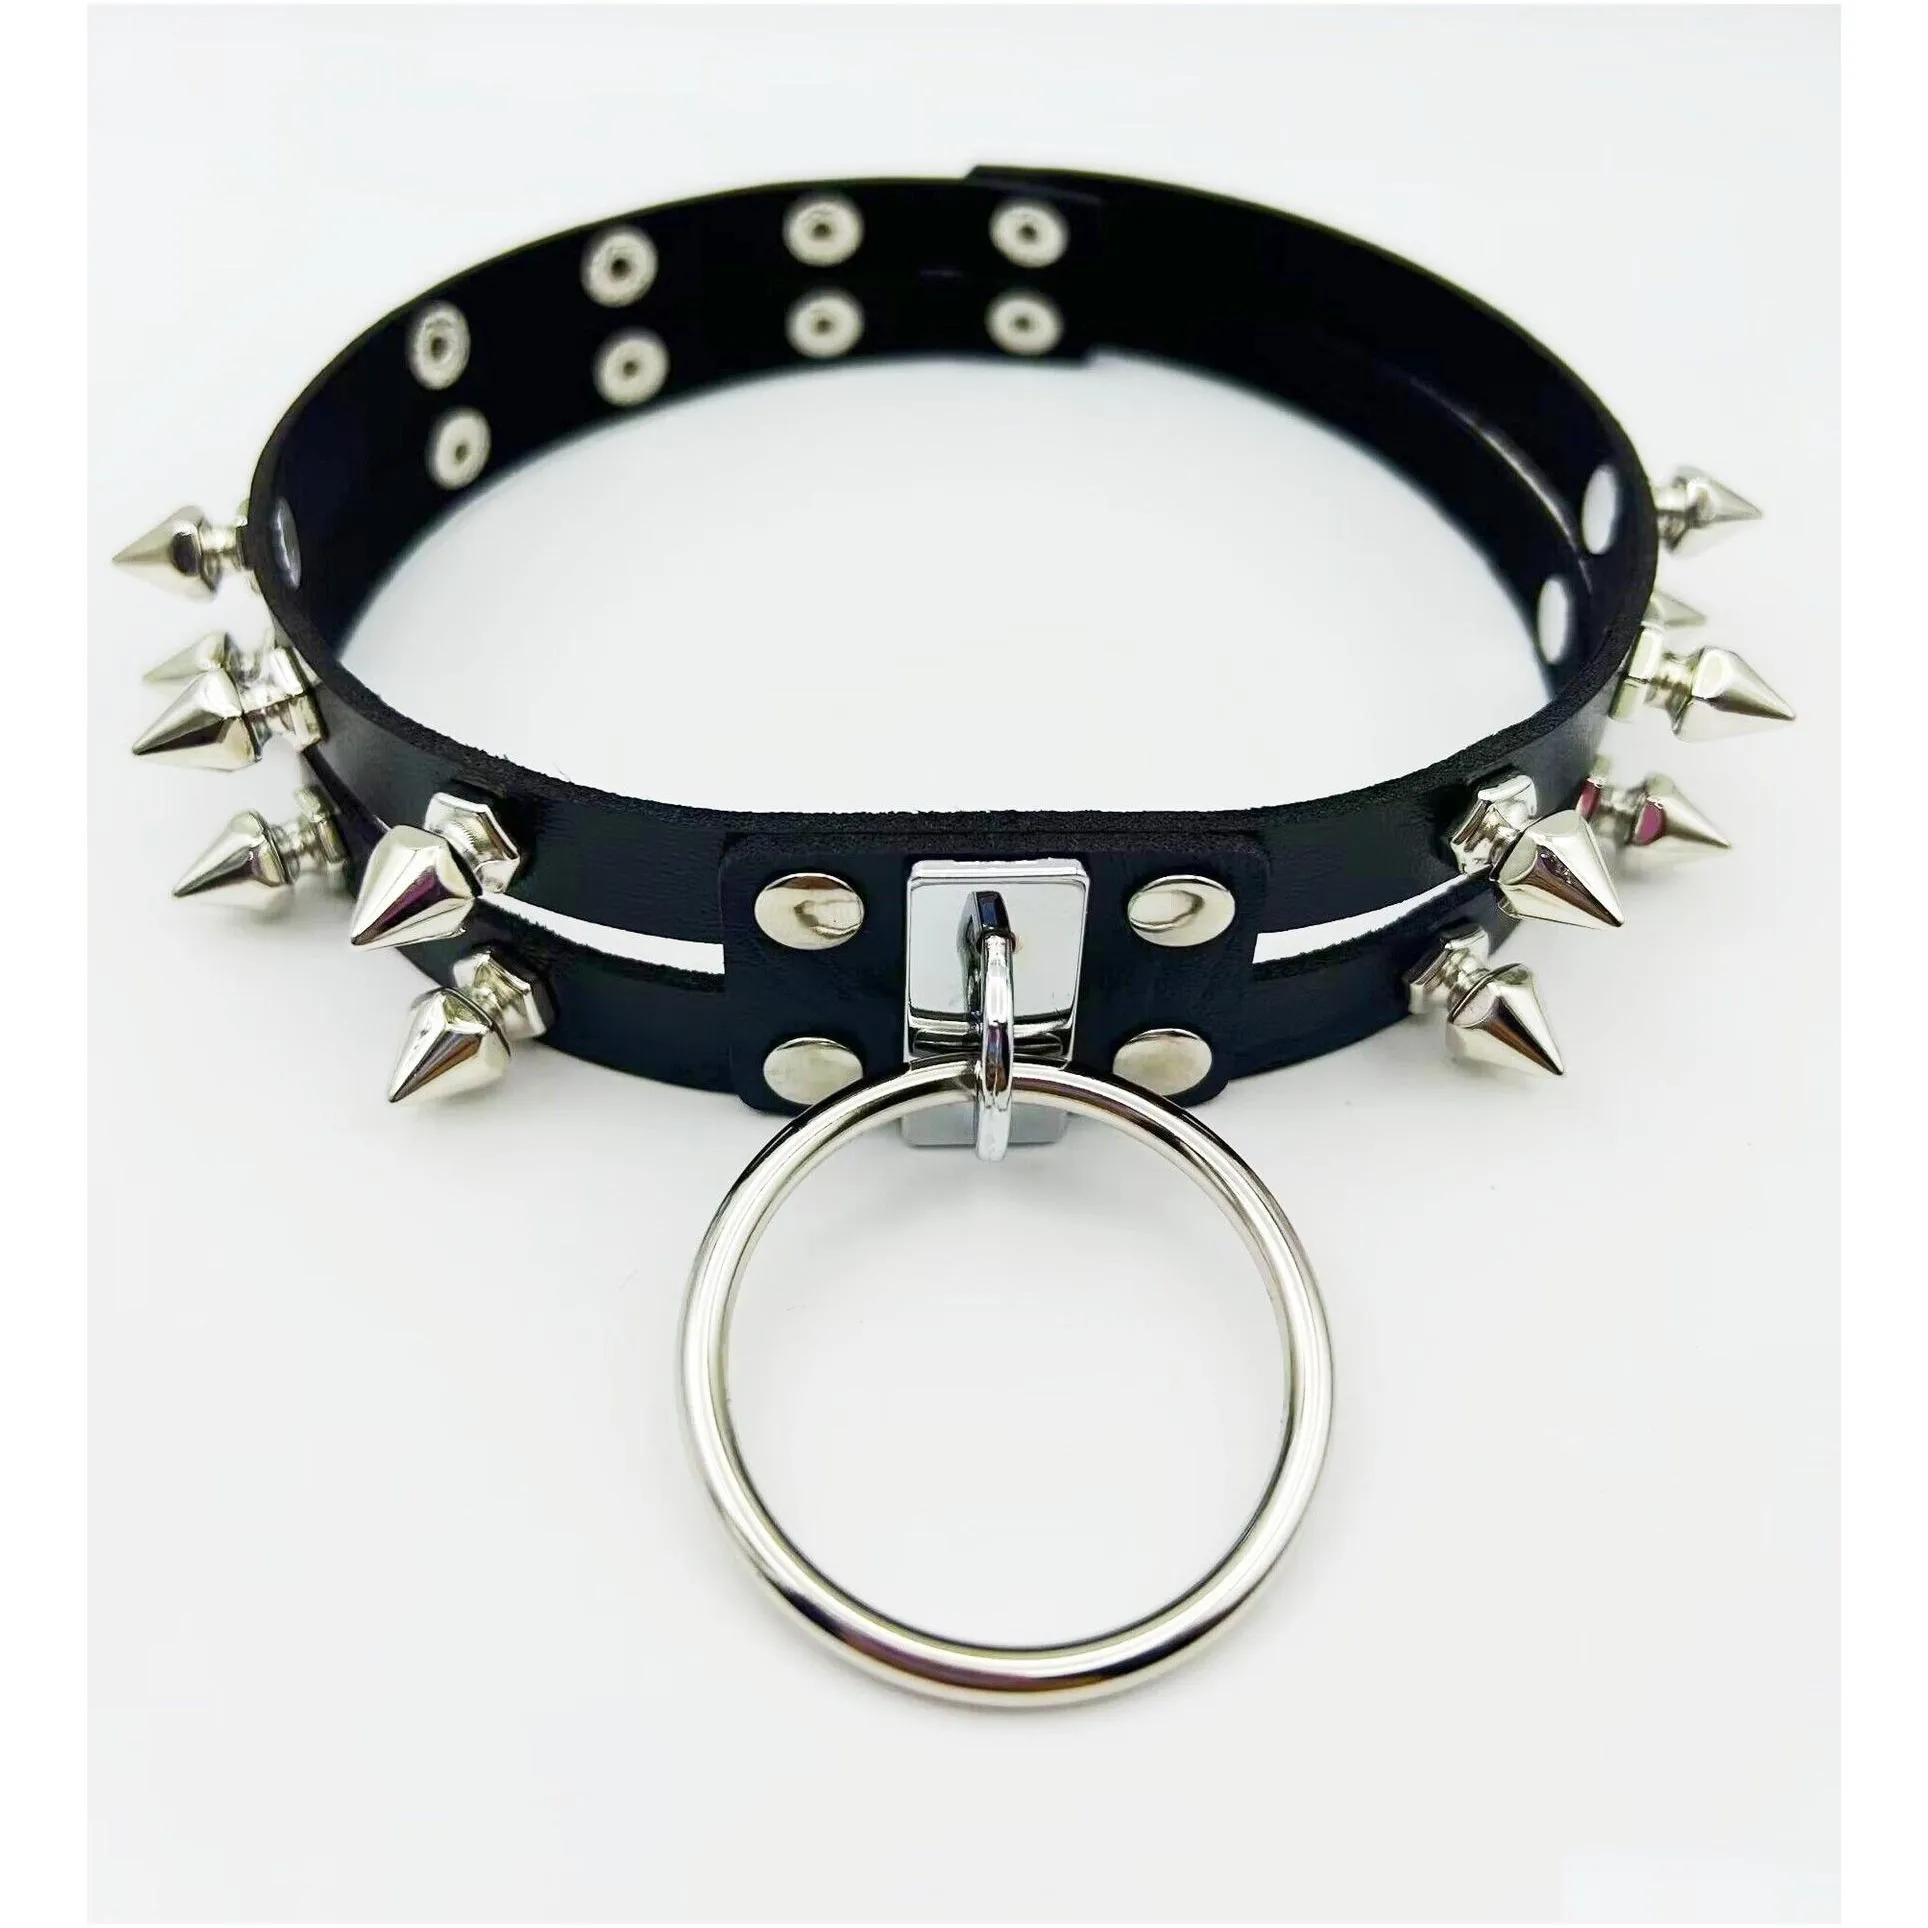 Chokers Gothic Black Spiked Punk Choker Collar Spikes Rivets Studded Chocker Necklace For Women Men Bondage Cosplay Goth Je Dhgarden